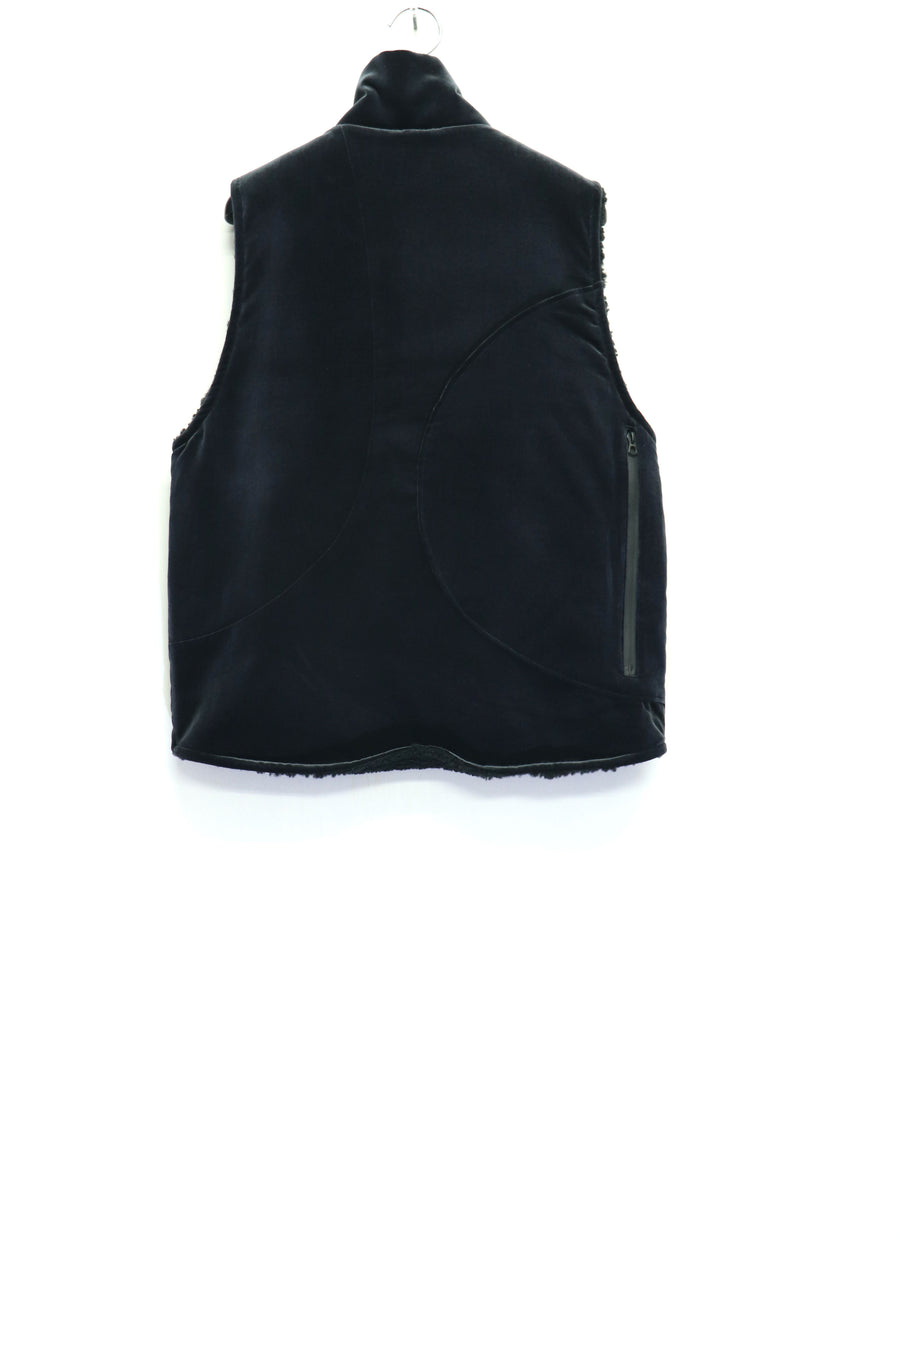 LEH  Wrapping Vest